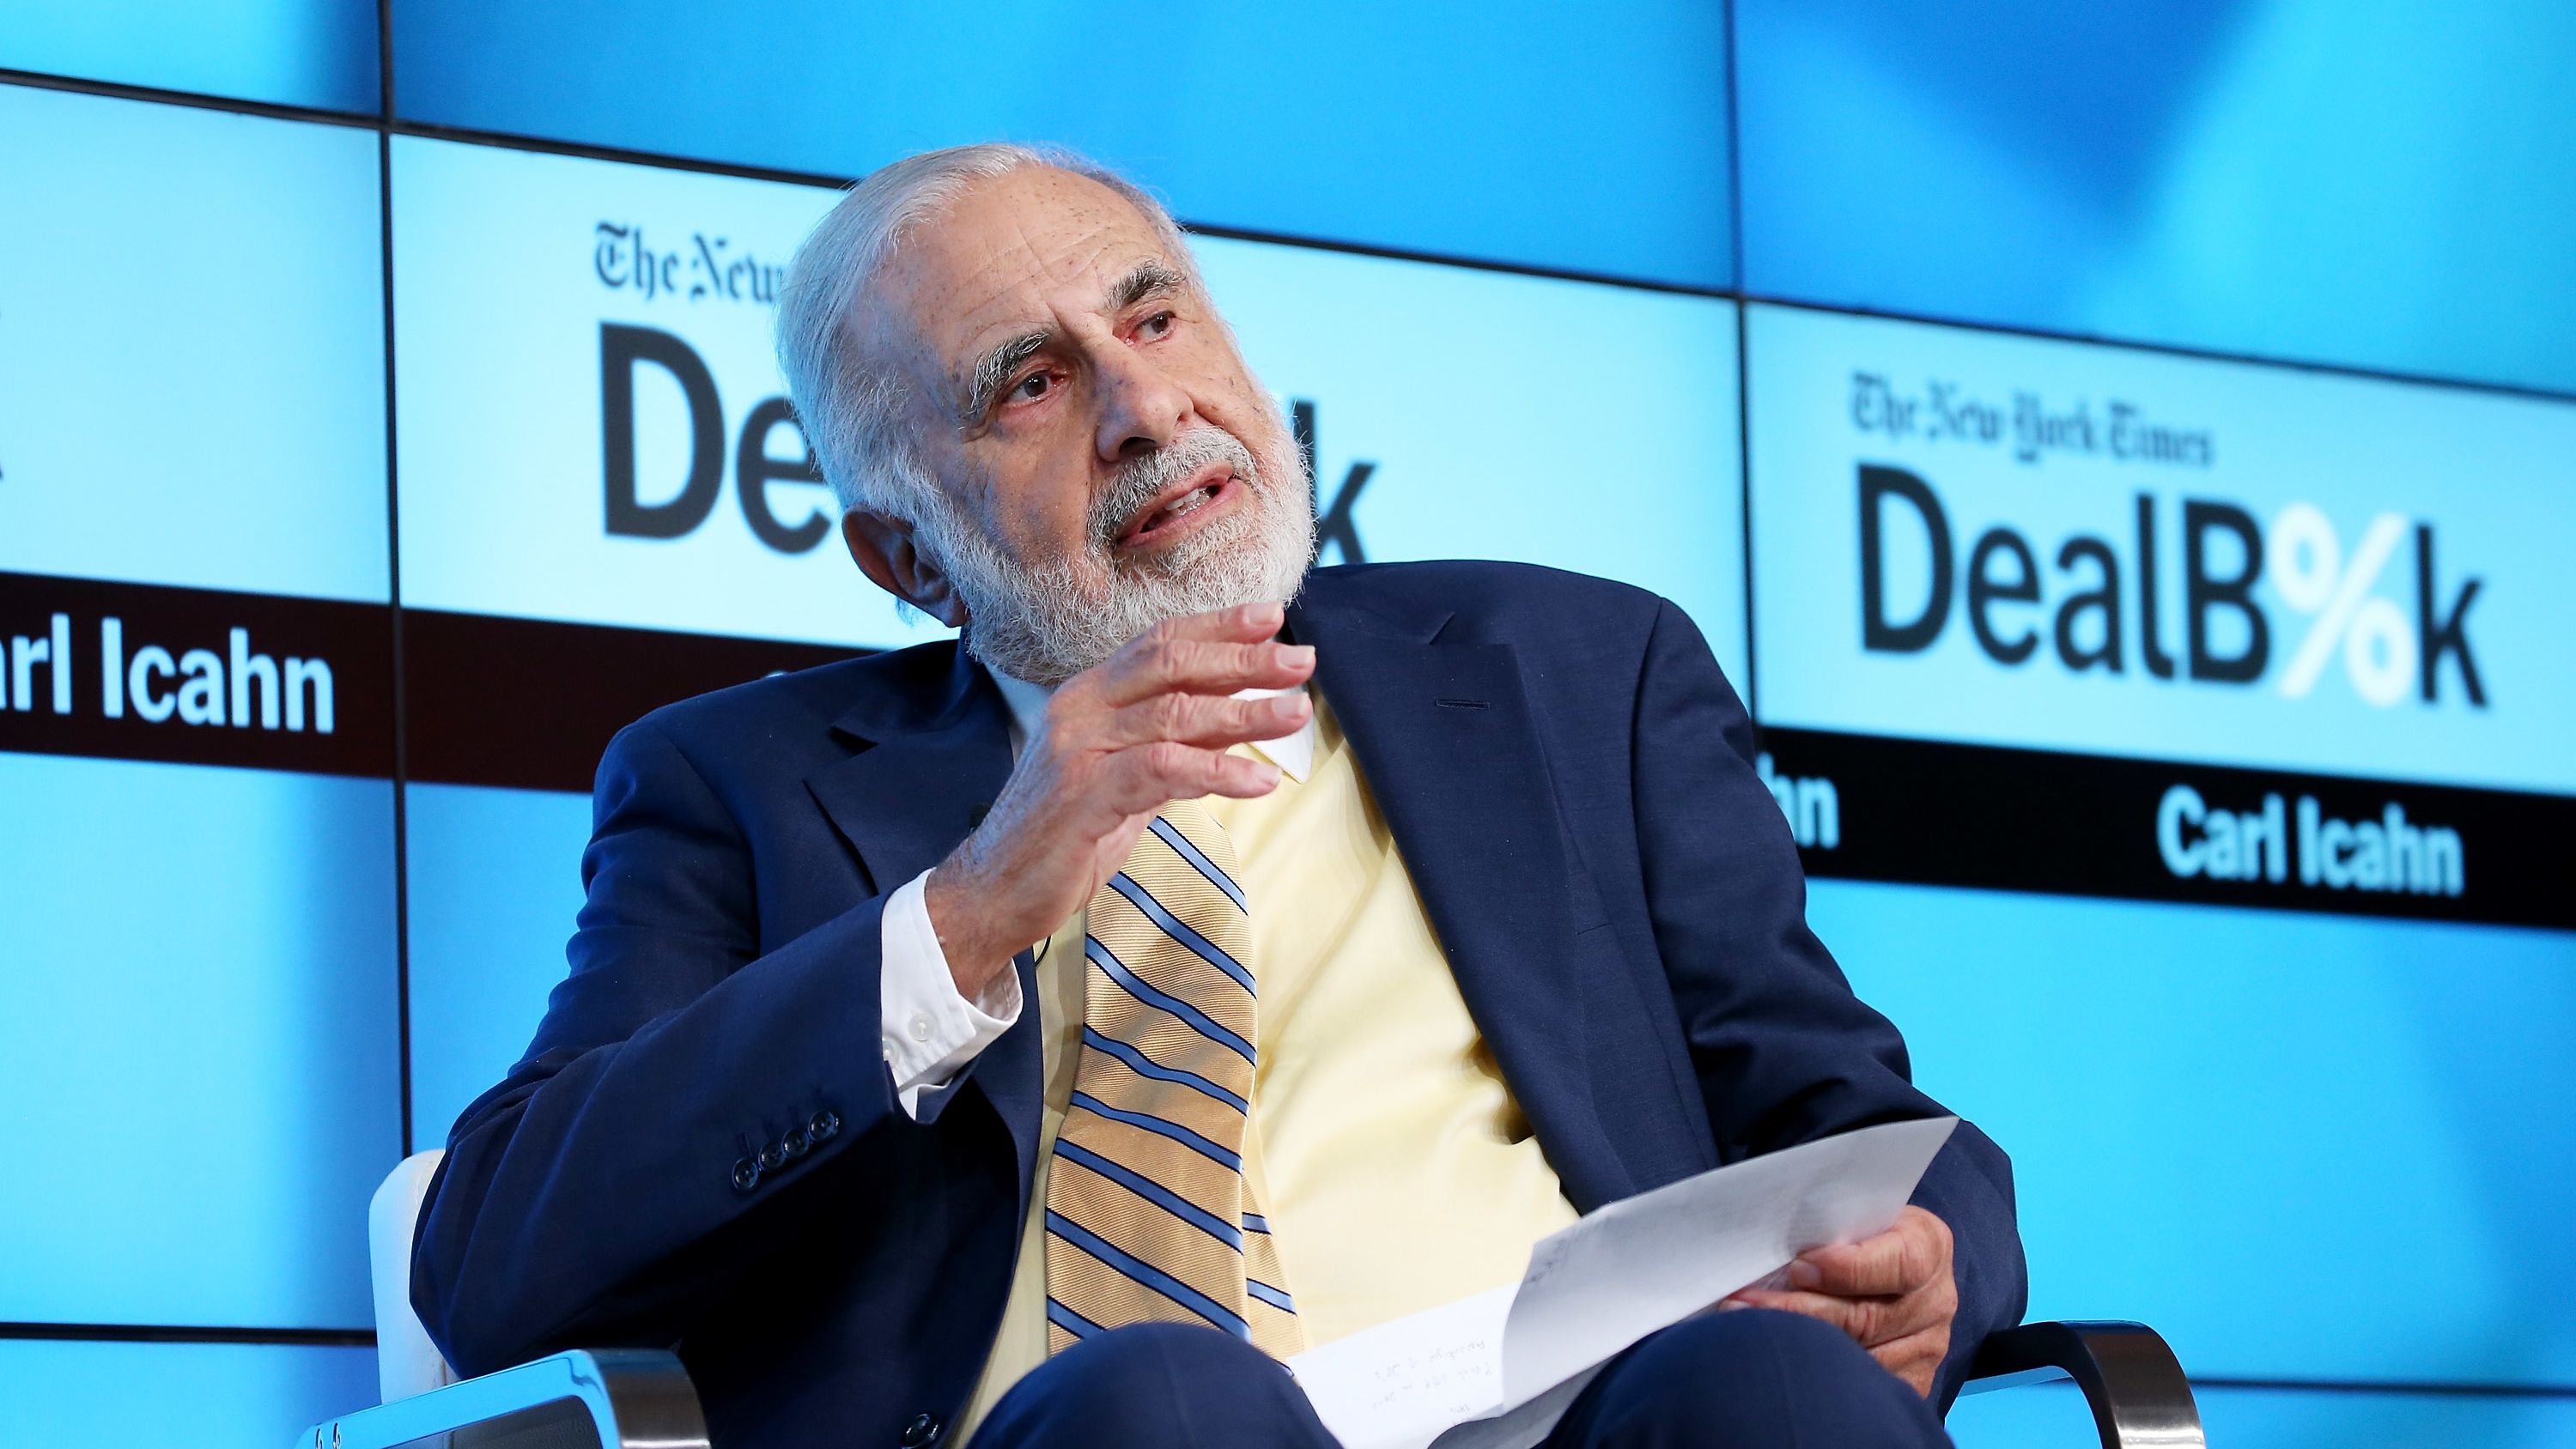 NEW YORK, NY - NOVEMBER 03:  Chairman of Icahn Enterprises Carl Icahn participates in a panel discussion at the New York Times 2015 DealBook Conference at the Whitney Museum of American Art on November 3, 2015, in New York City.  (Photo by Neilson Barnard/Getty Images for New York Times)